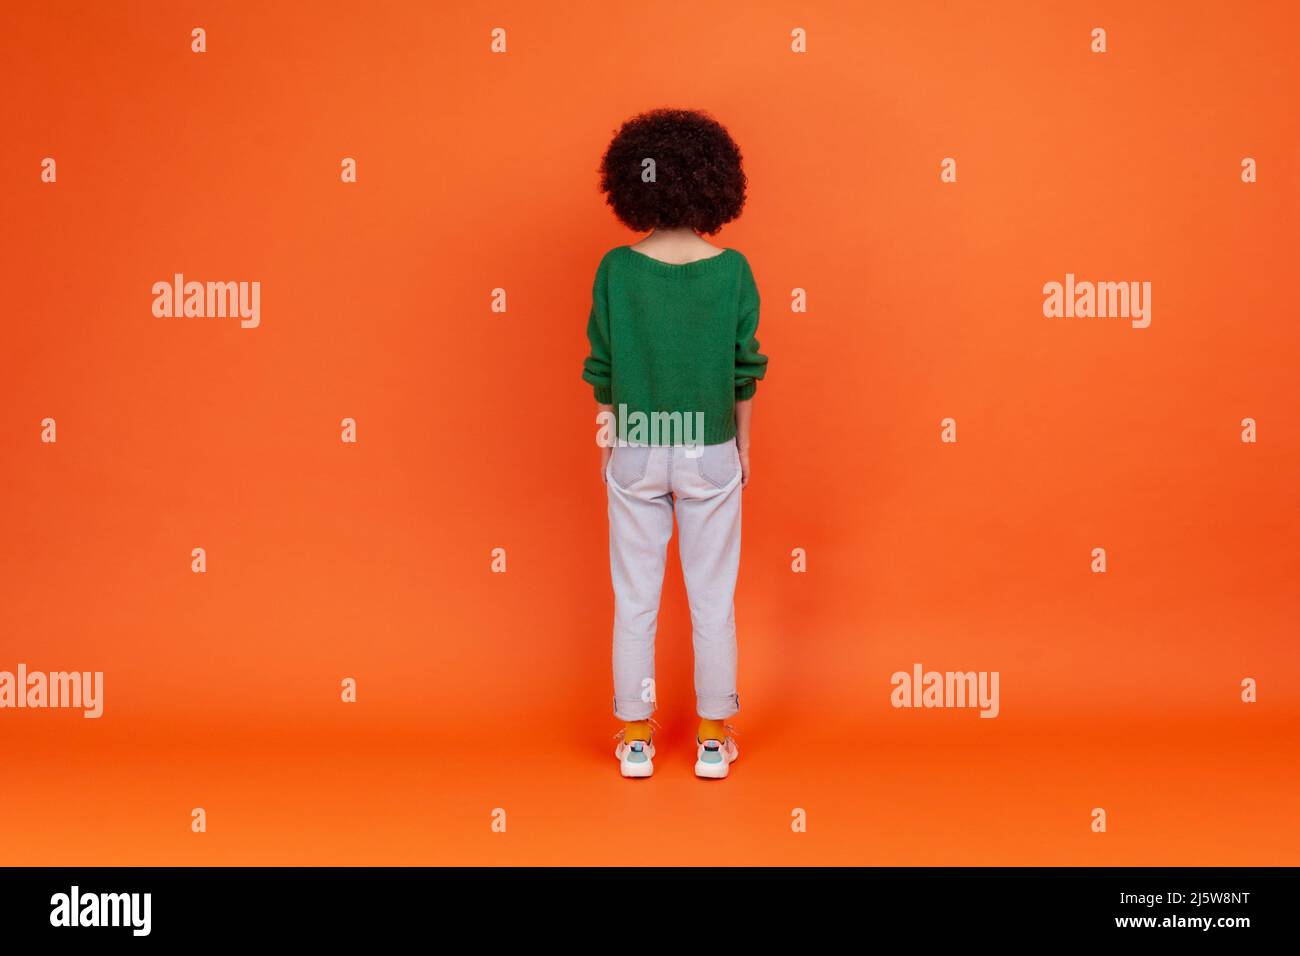 Back view of slim woman with Afro hairstyle wearing green casual style sweater and jeans standing and looking at something, waiting. Indoor studio shot isolated on orange background. Stock Photo